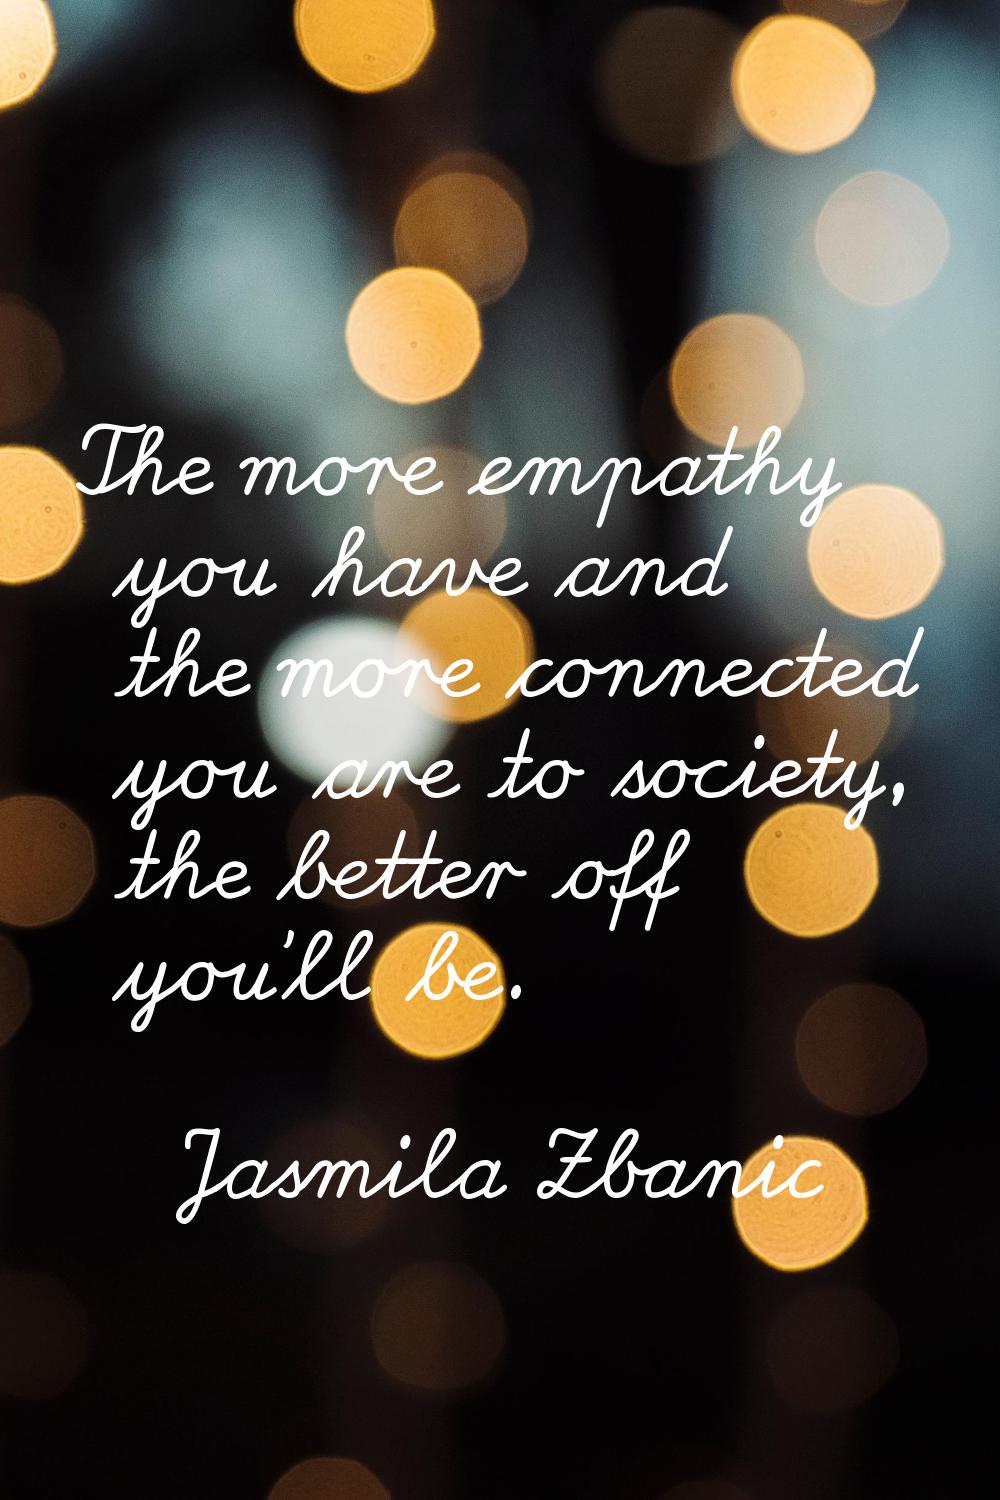 The more empathy you have and the more connected you are to society, the better off you'll be.